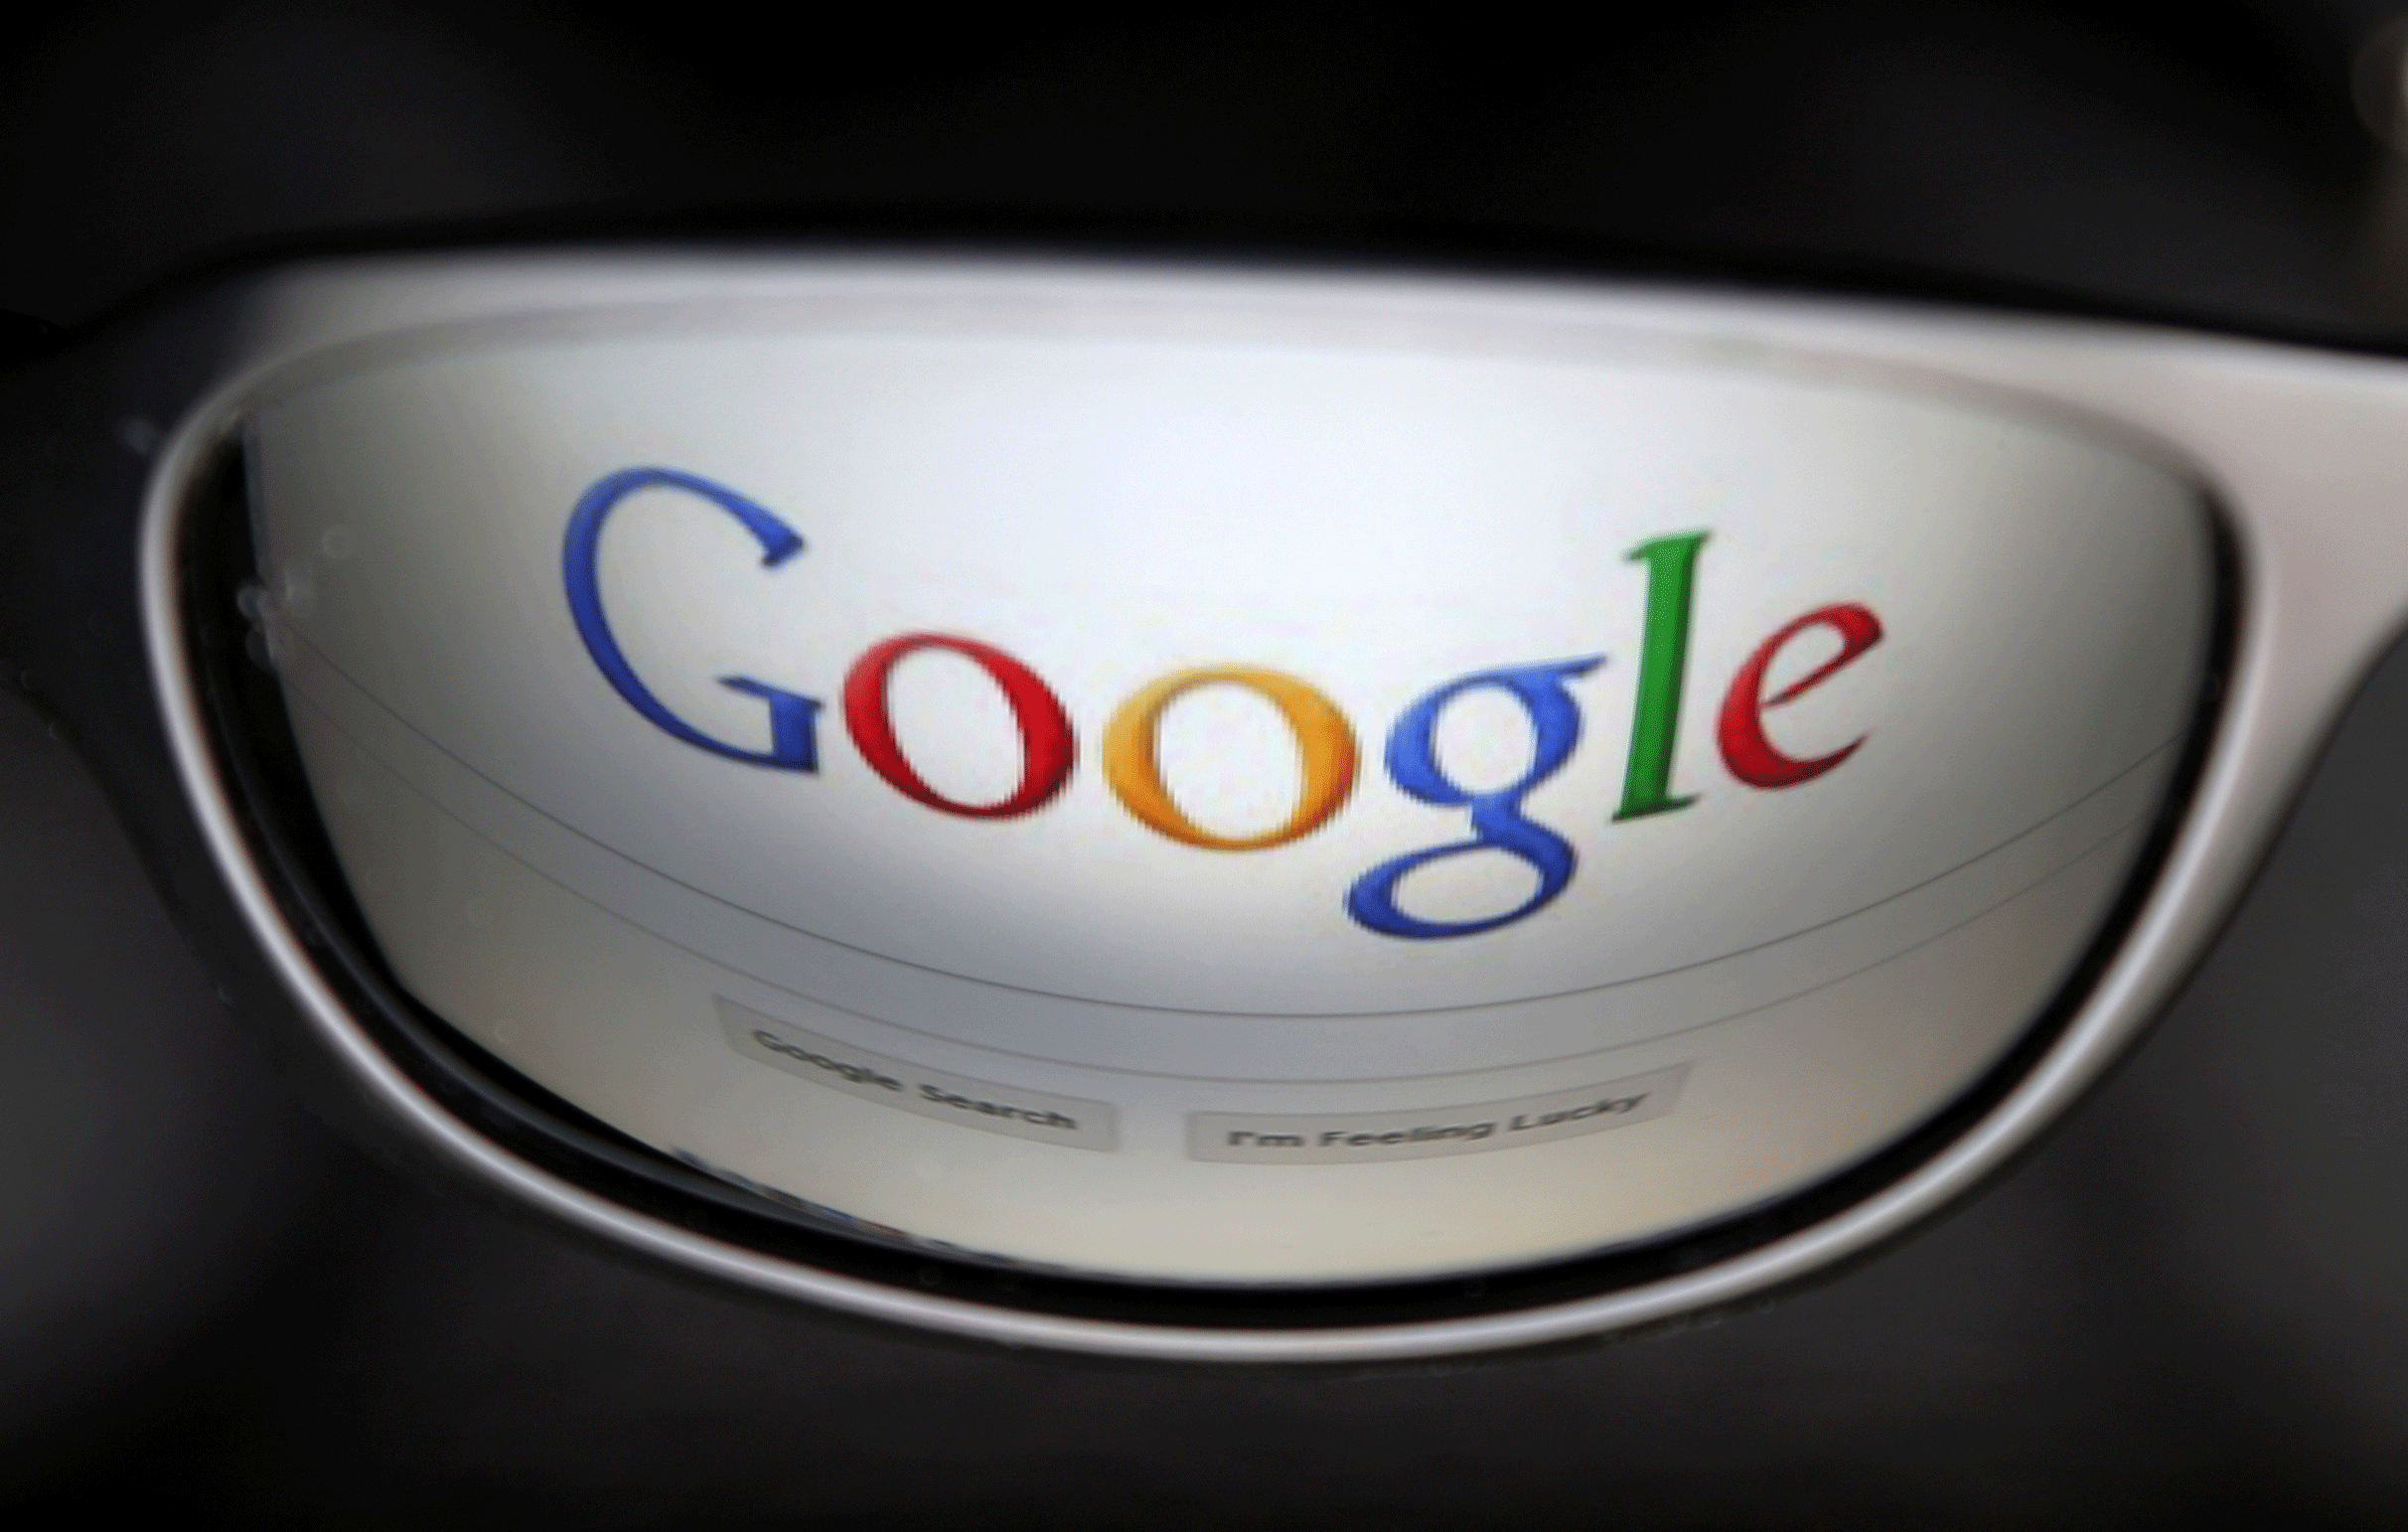 Google hit with record EU fine over 'unfair' shopping searches